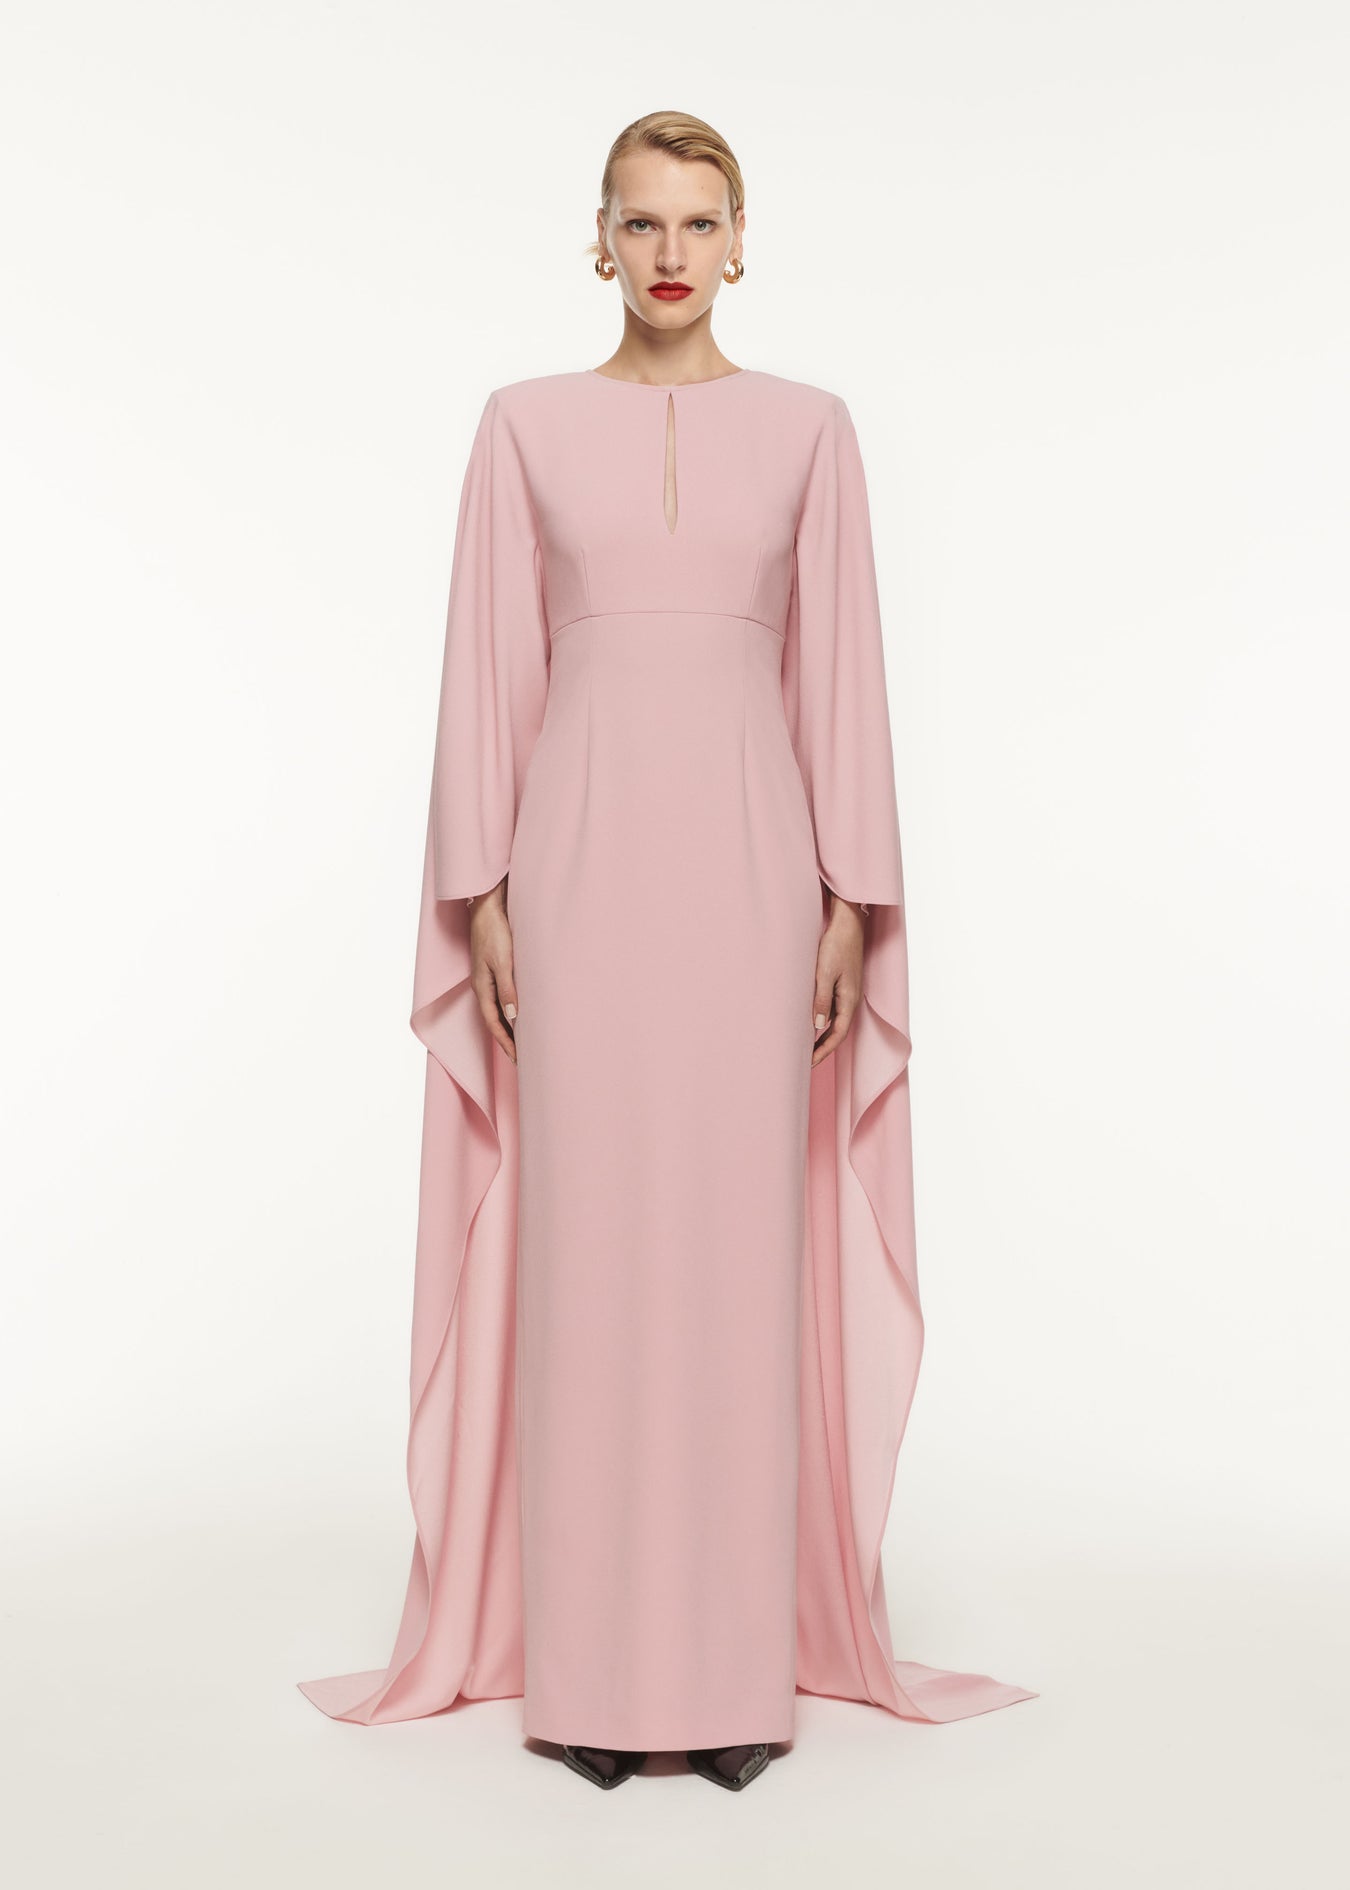 A woman wearing the Long Sleeve Satin Crepe Maxi Dress in Pink